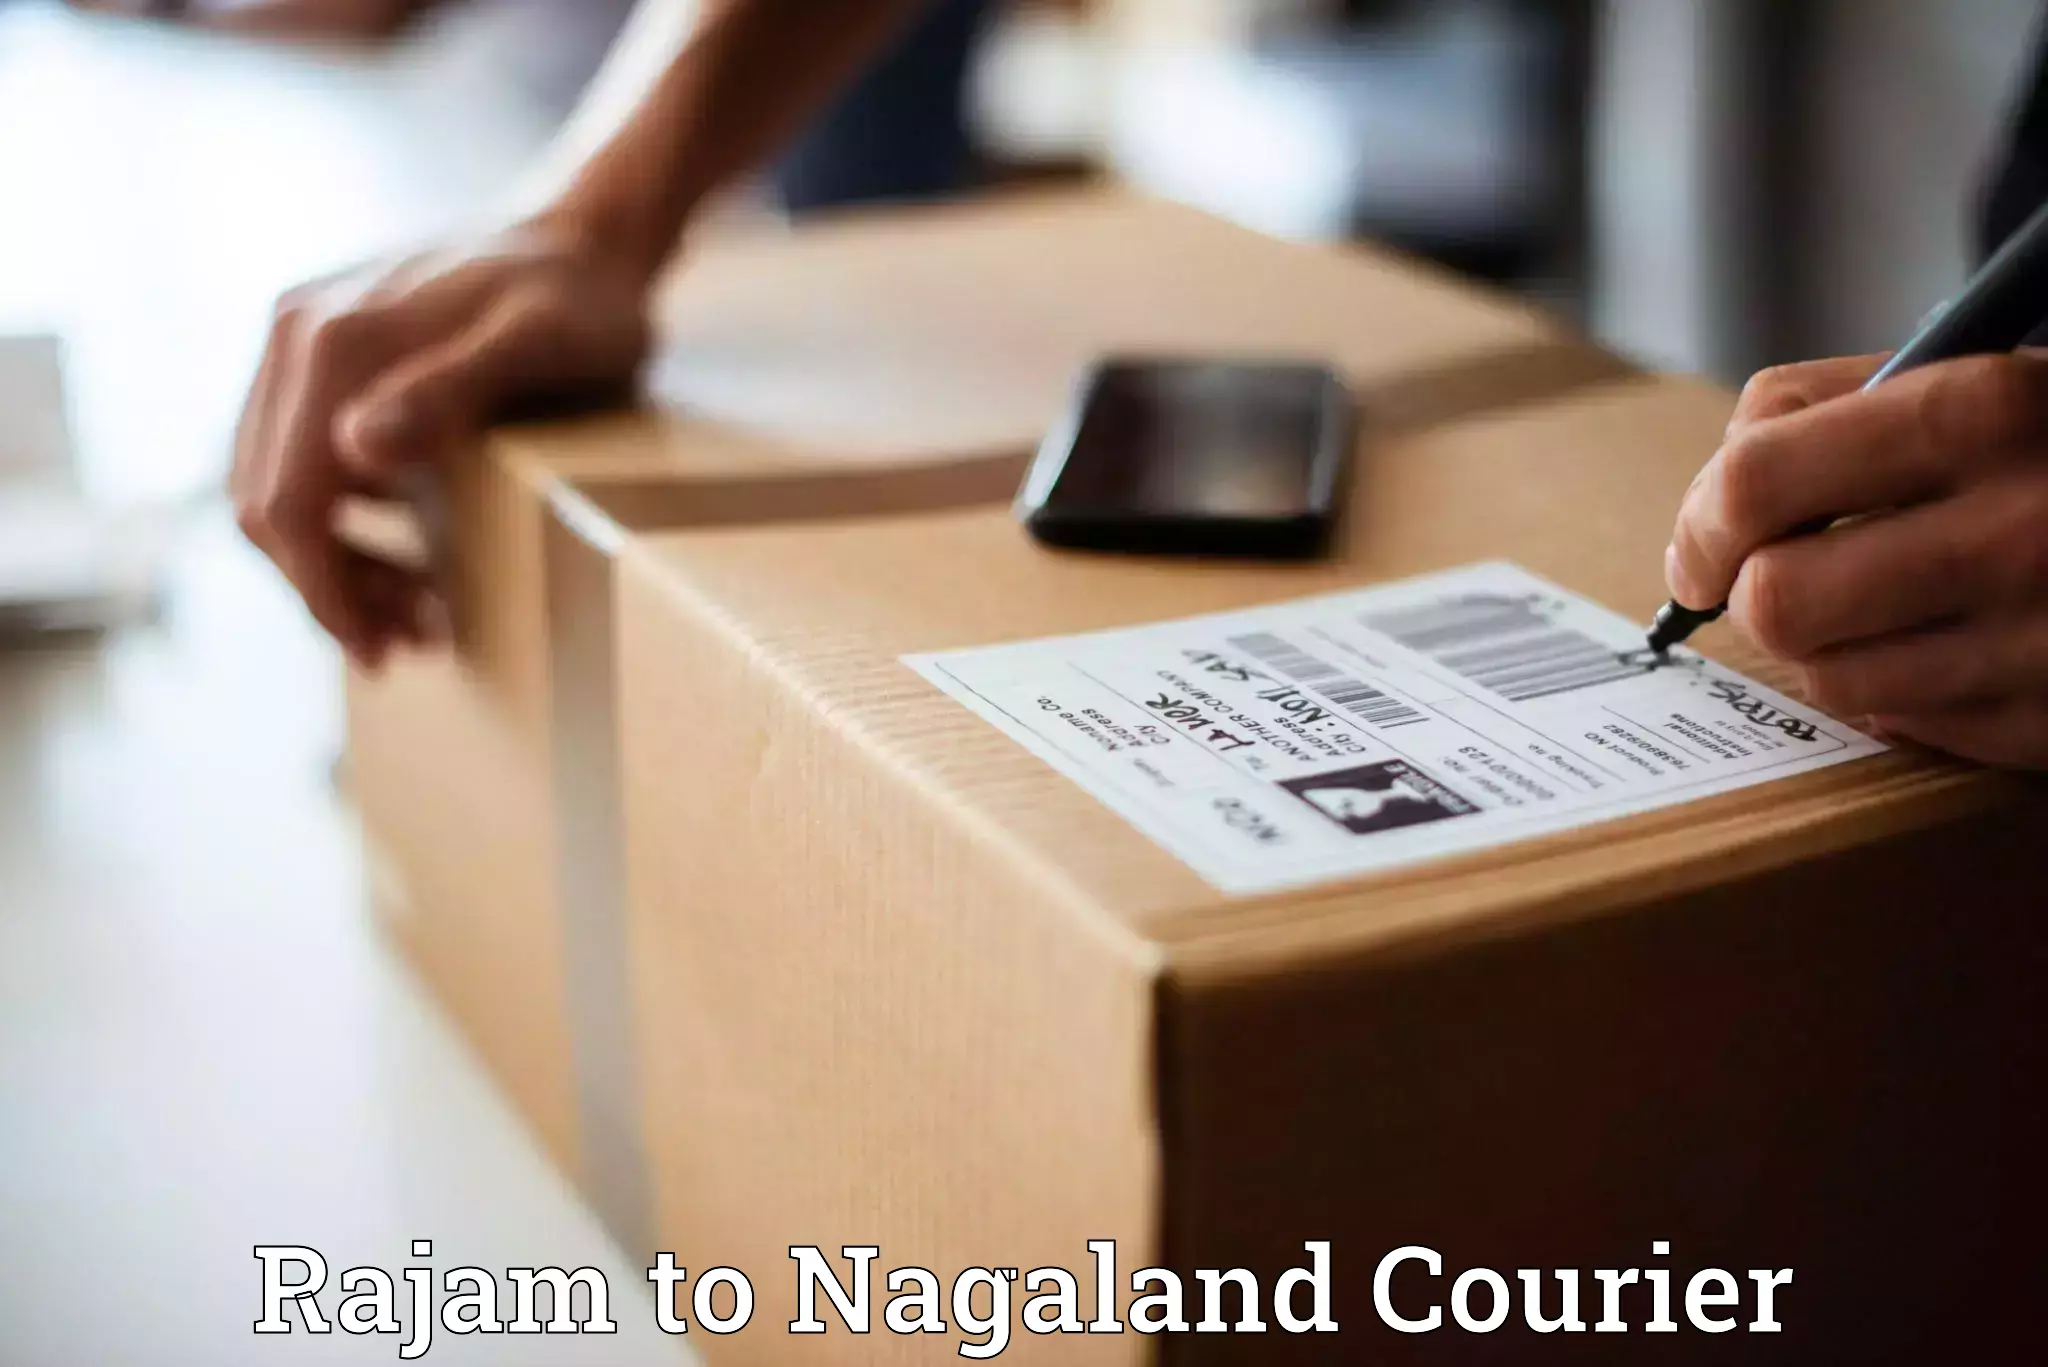 Nationwide delivery network Rajam to Nagaland